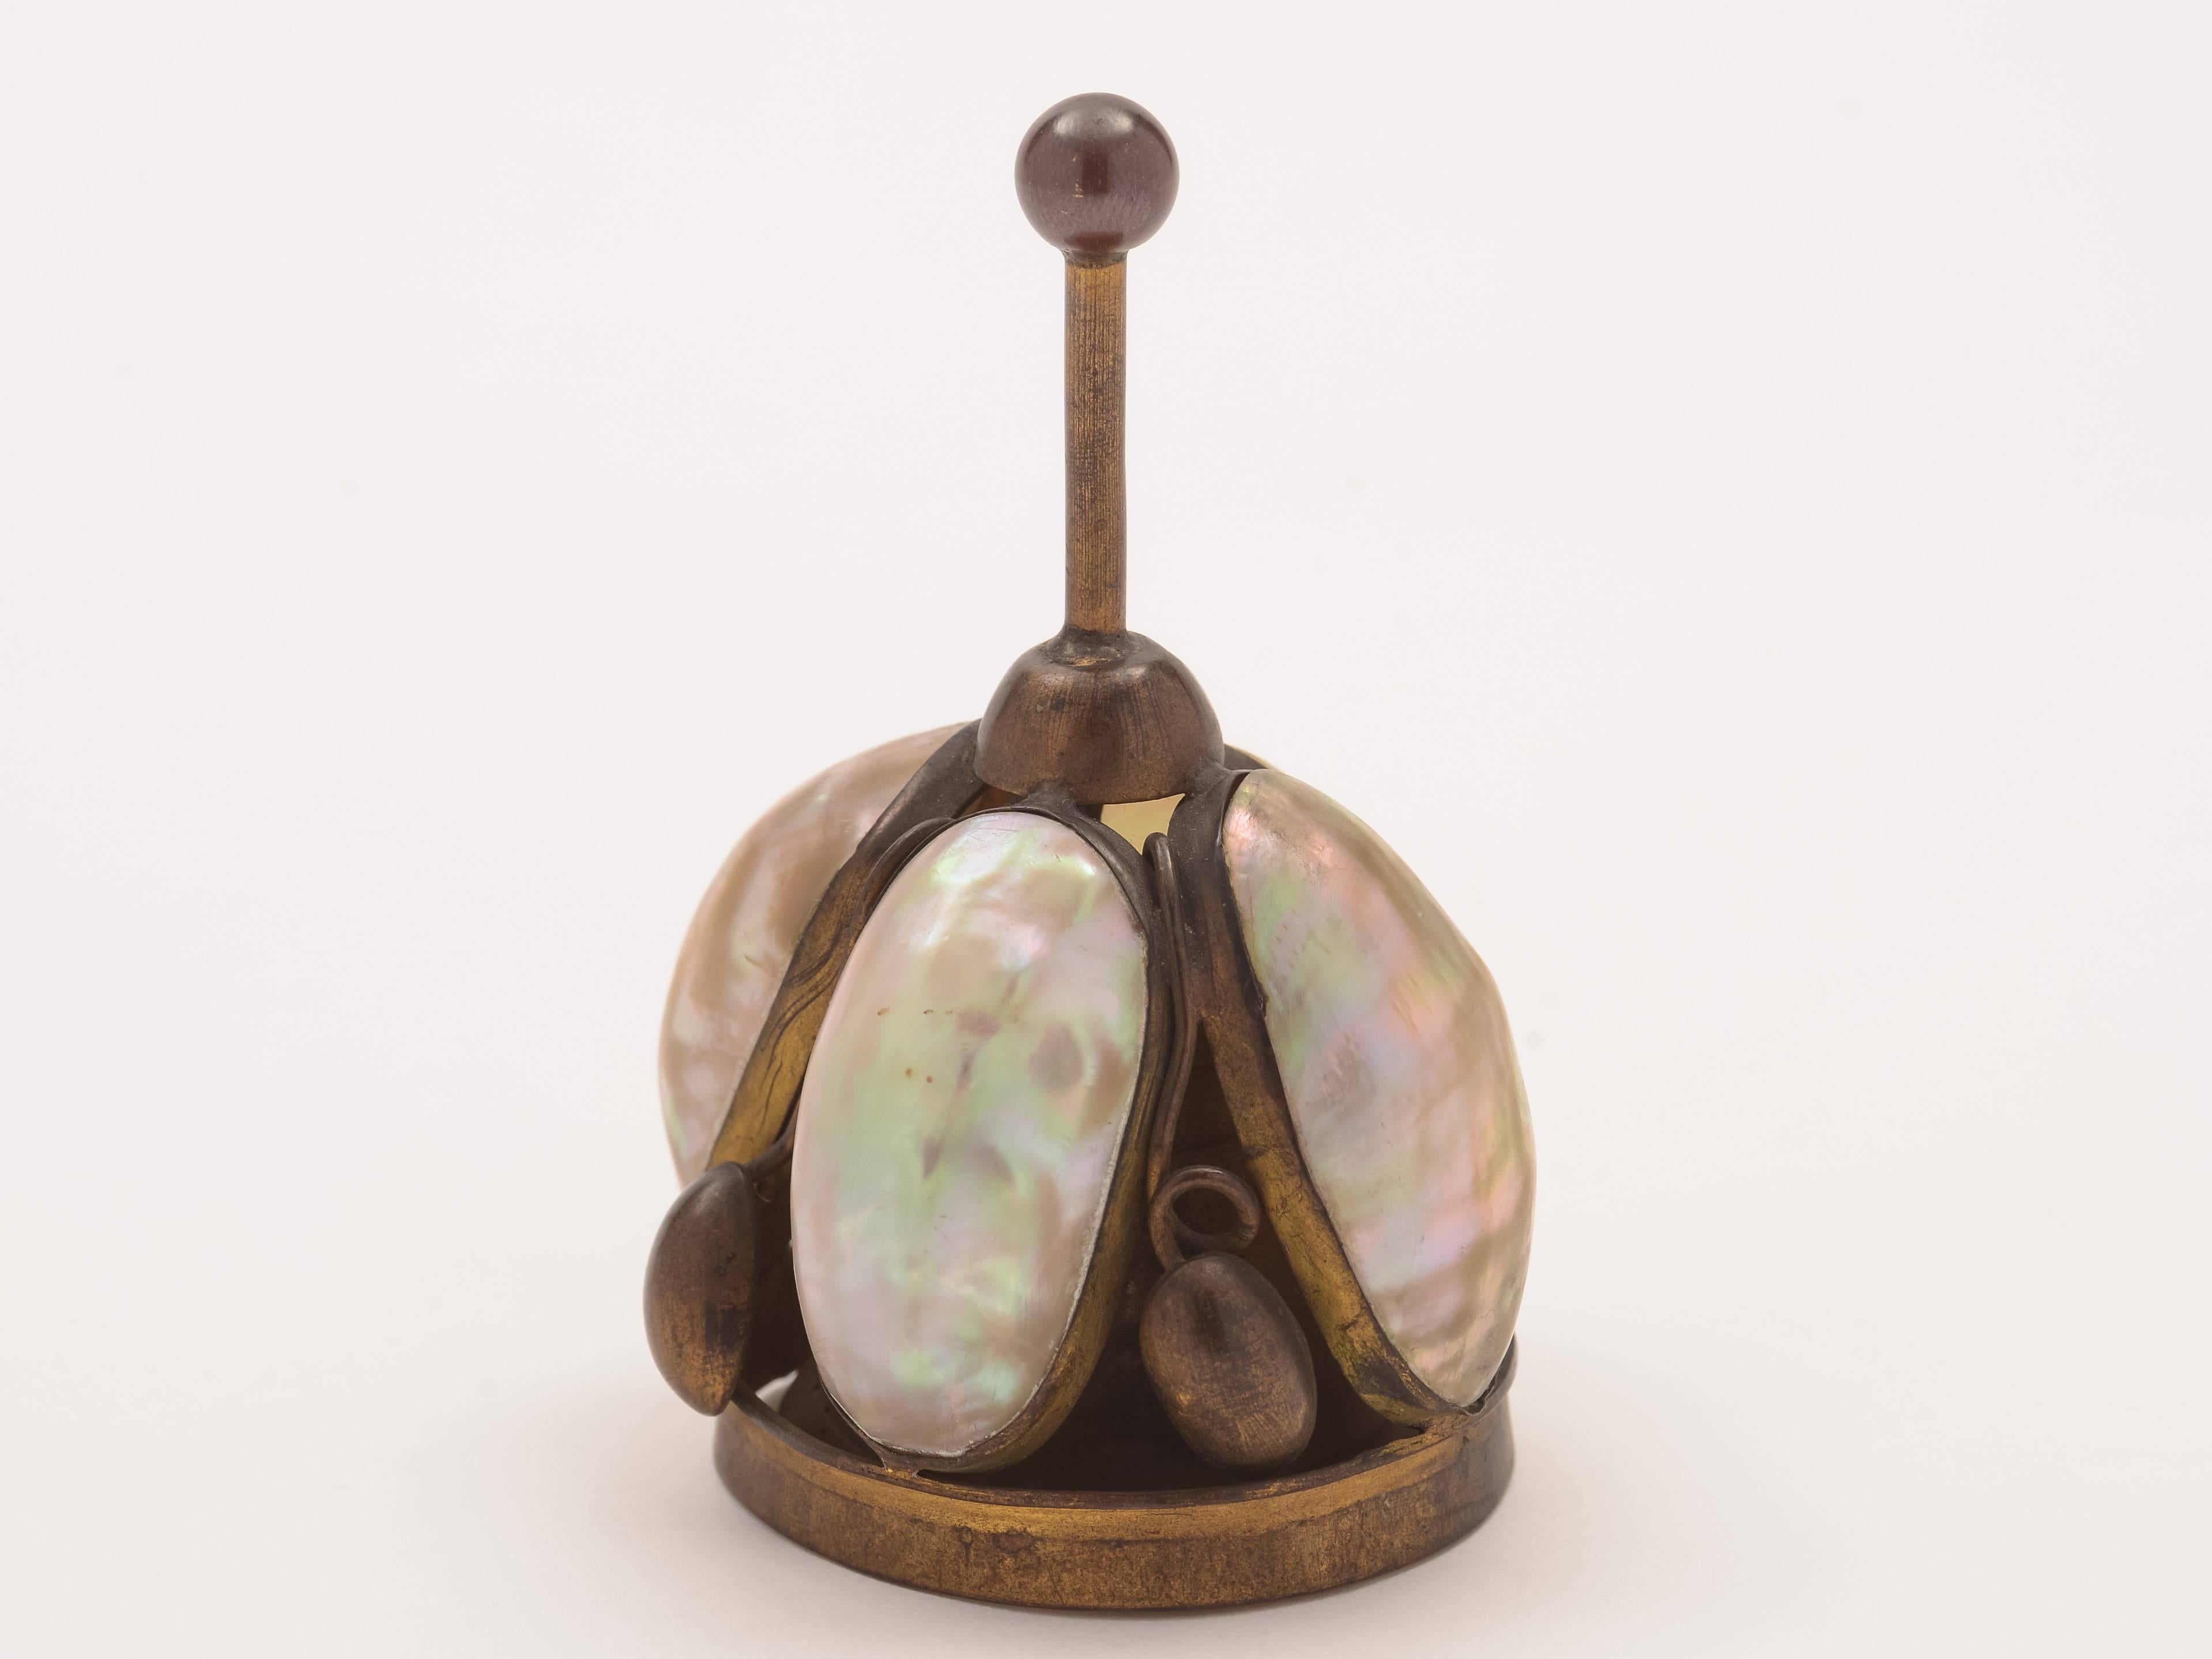 A lovely French brass table bell with four polished shells inset in brass gilt (has a nice ring to it), circa 1900.

Measurements:
Height 3 1/2